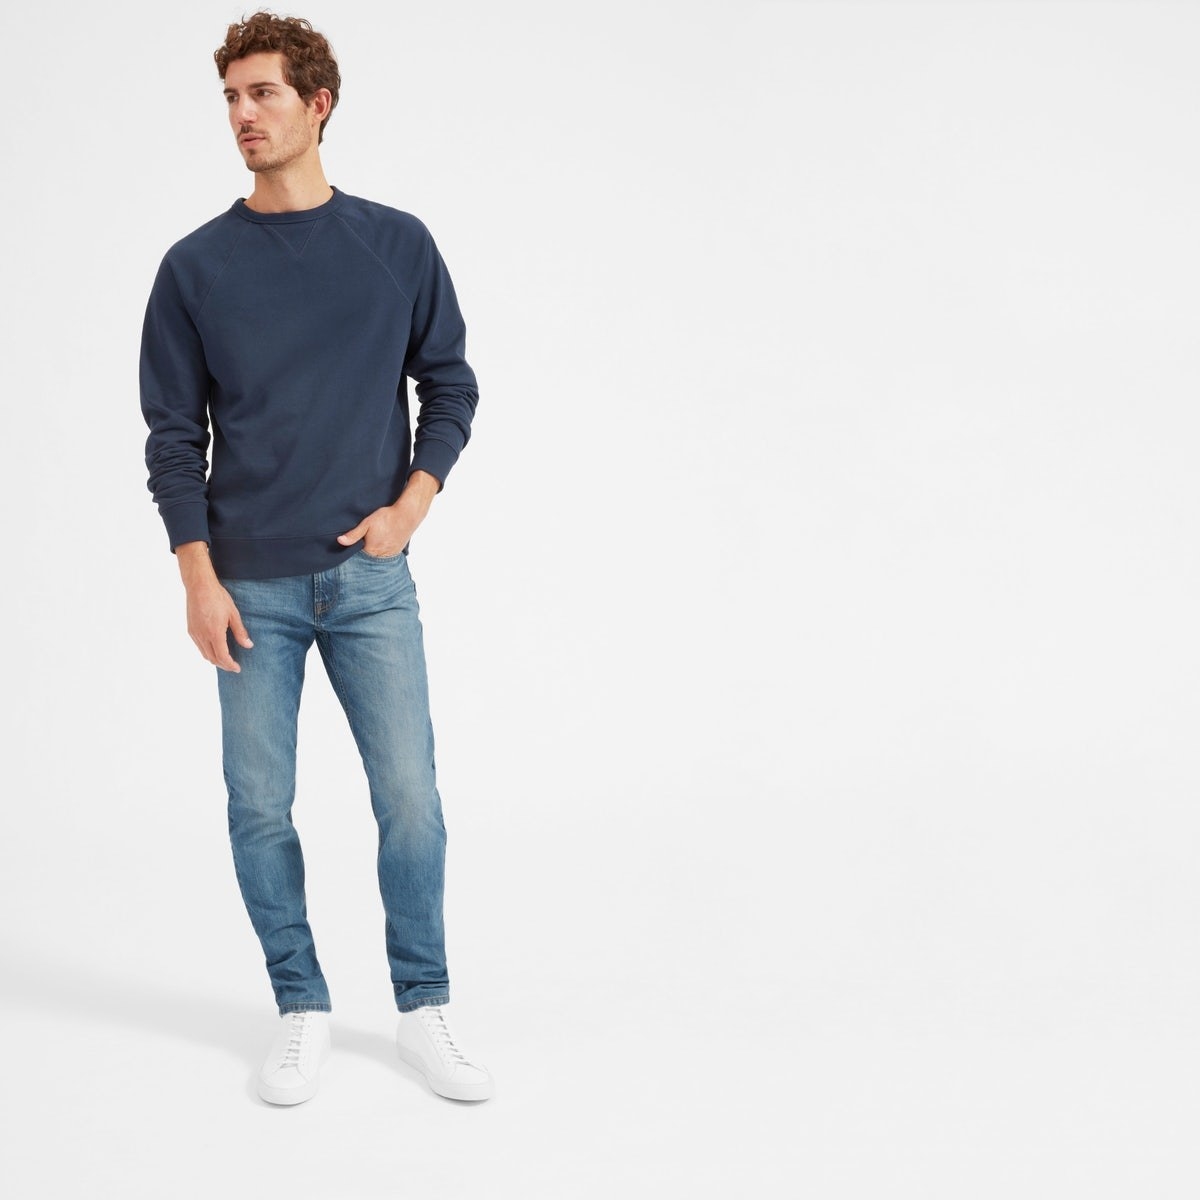 Everlane Sells Jeans Now, So Get Your Credit Cards Ready